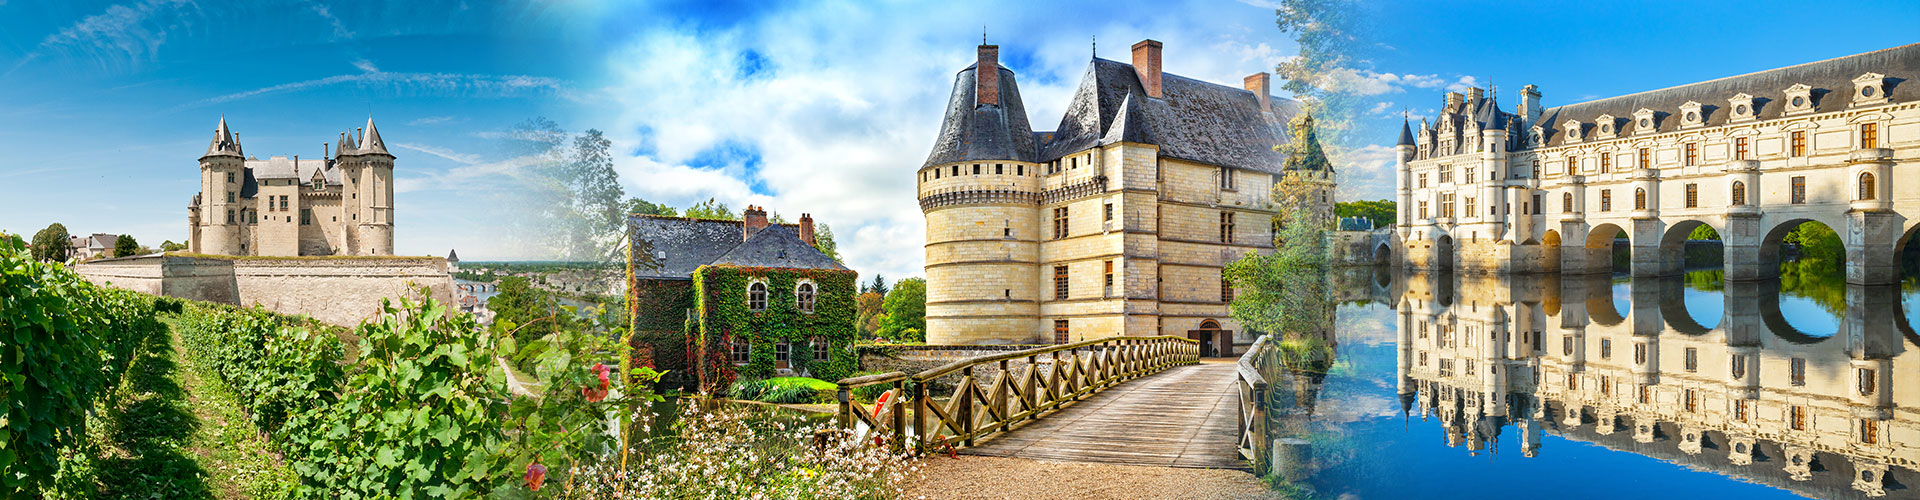 transfer to loire valley